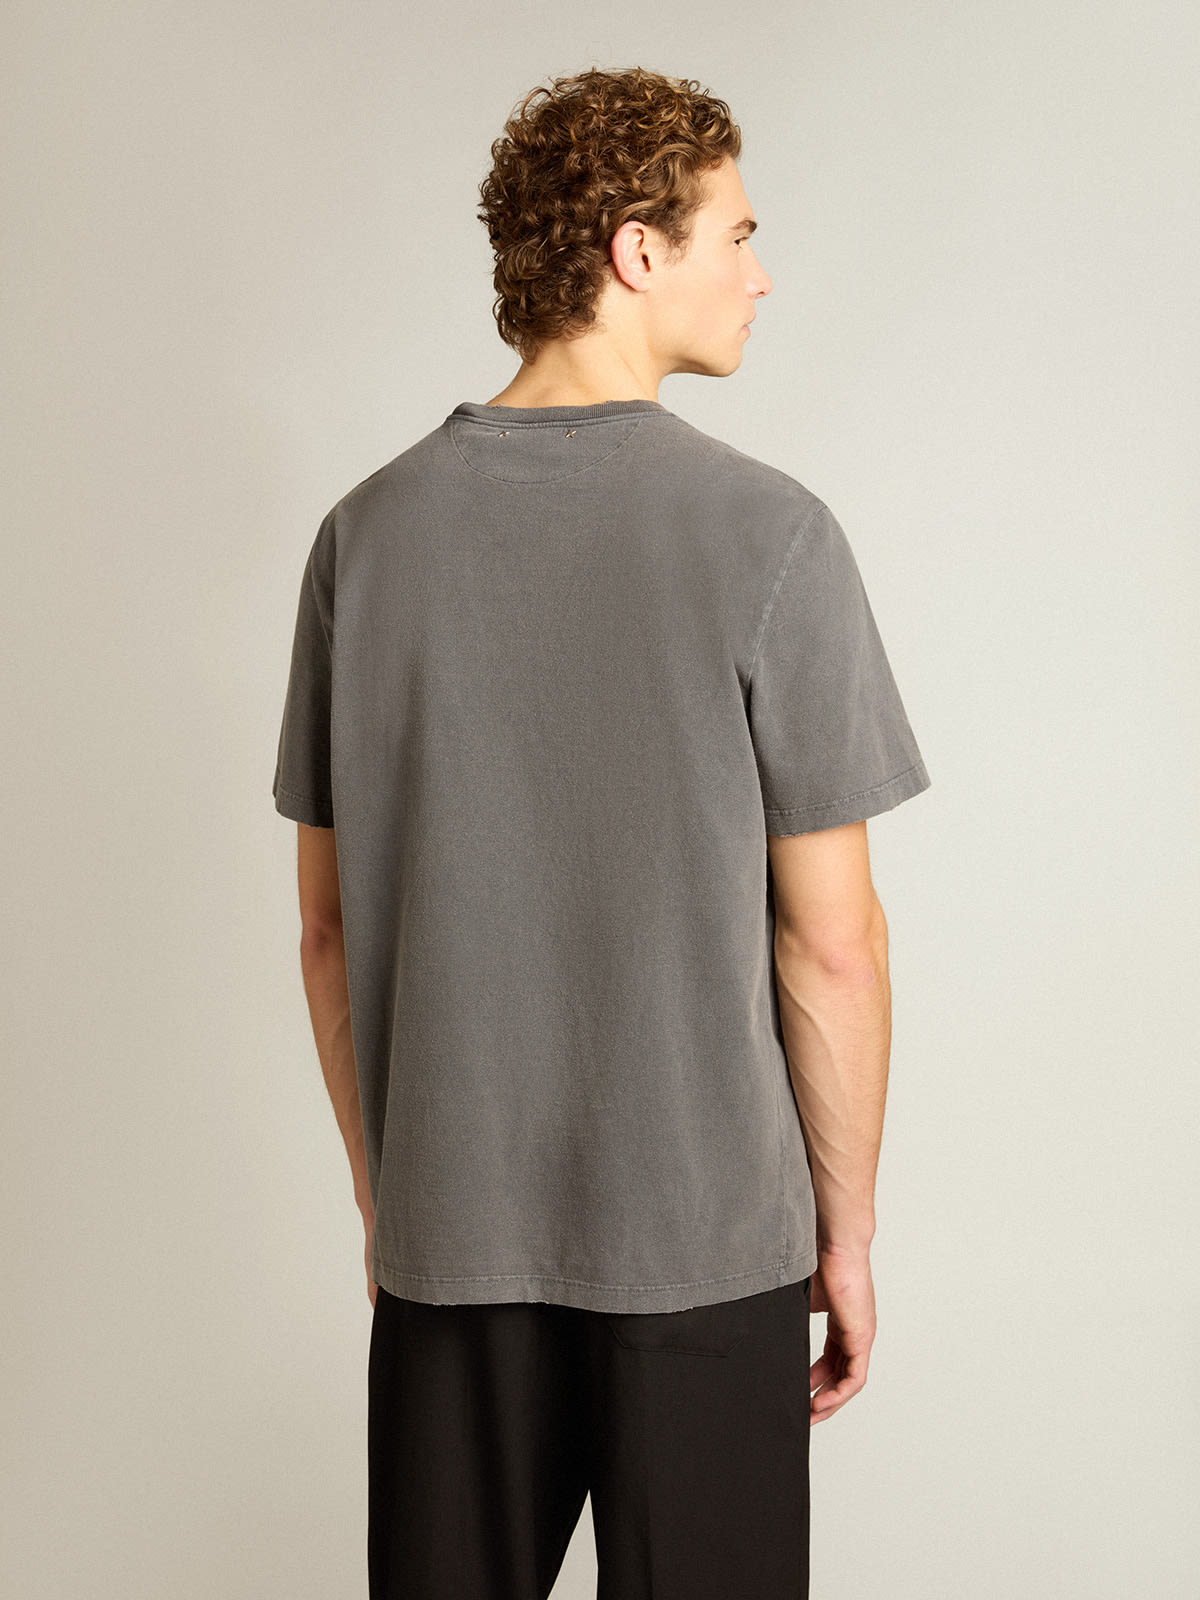 Golden Goose - Men's anthracite gray T-shirt with distressed treatment in 